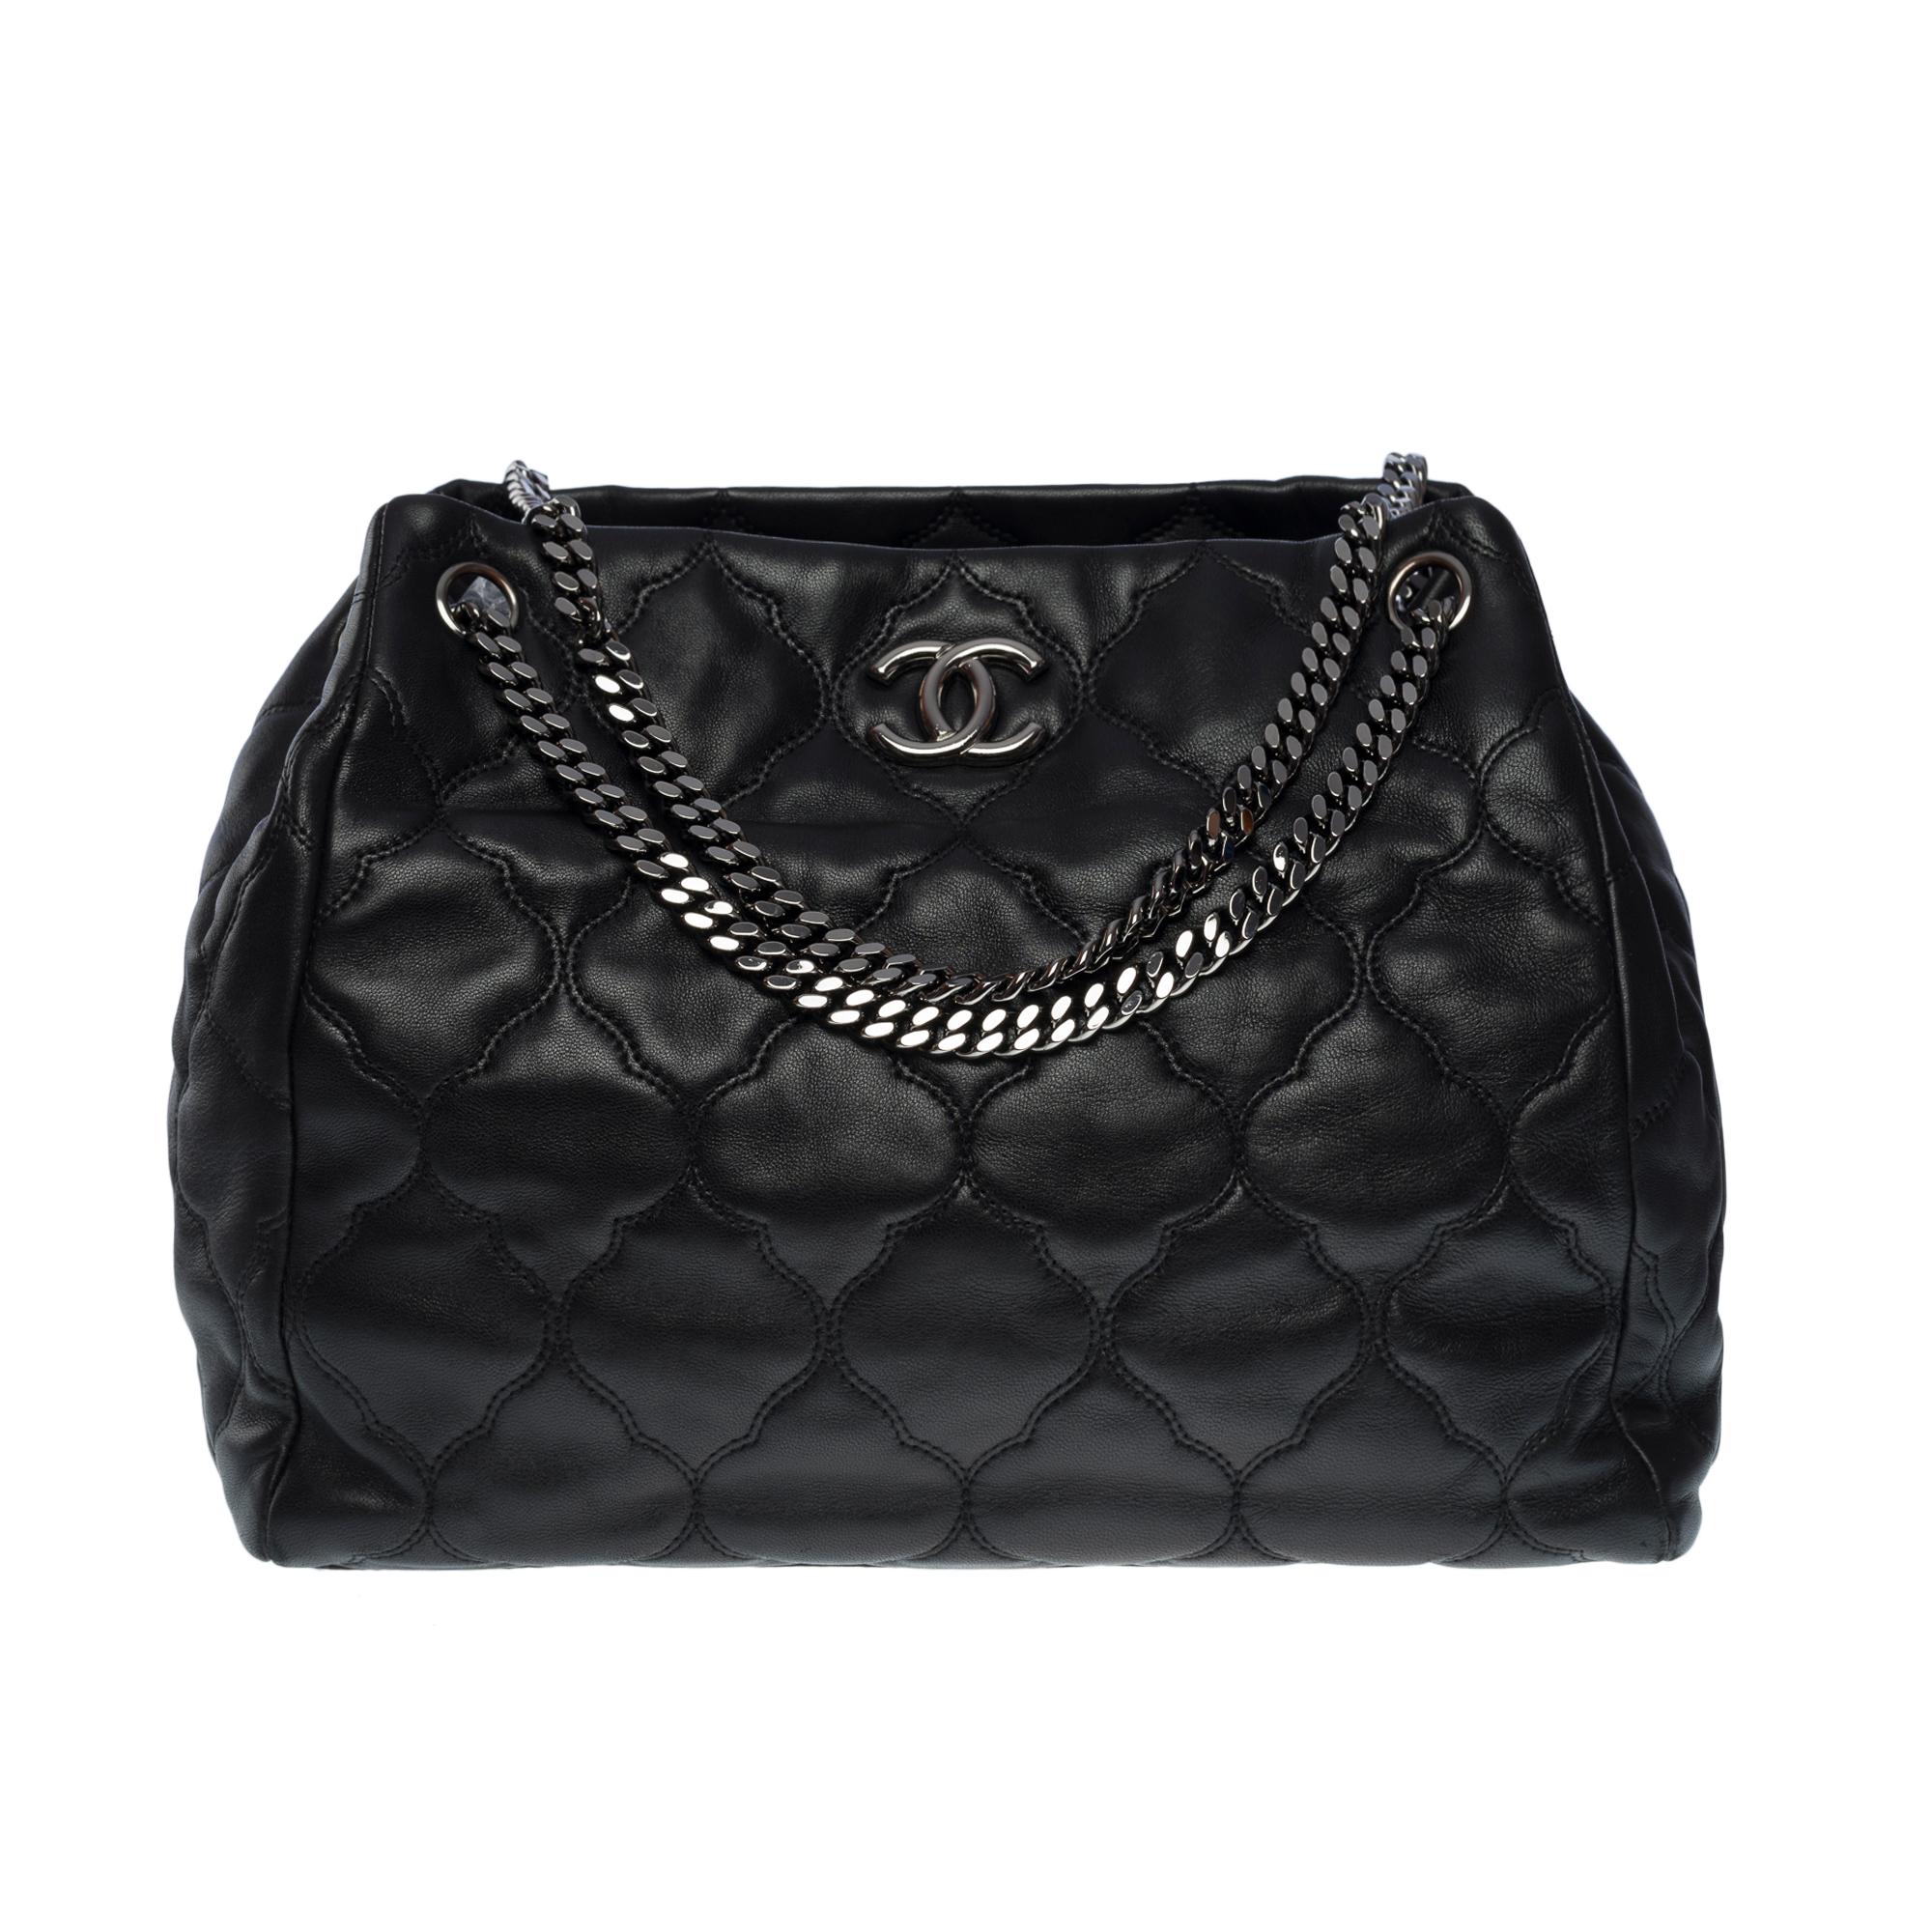 Chanel Hamptons shoulder bag in black puffy quilted leather, silver metal hardware, flat silver metal chain handle for hand or shoulder support

Silver metal signature closure on front
Black leather lining, one zippered pocket, one patch